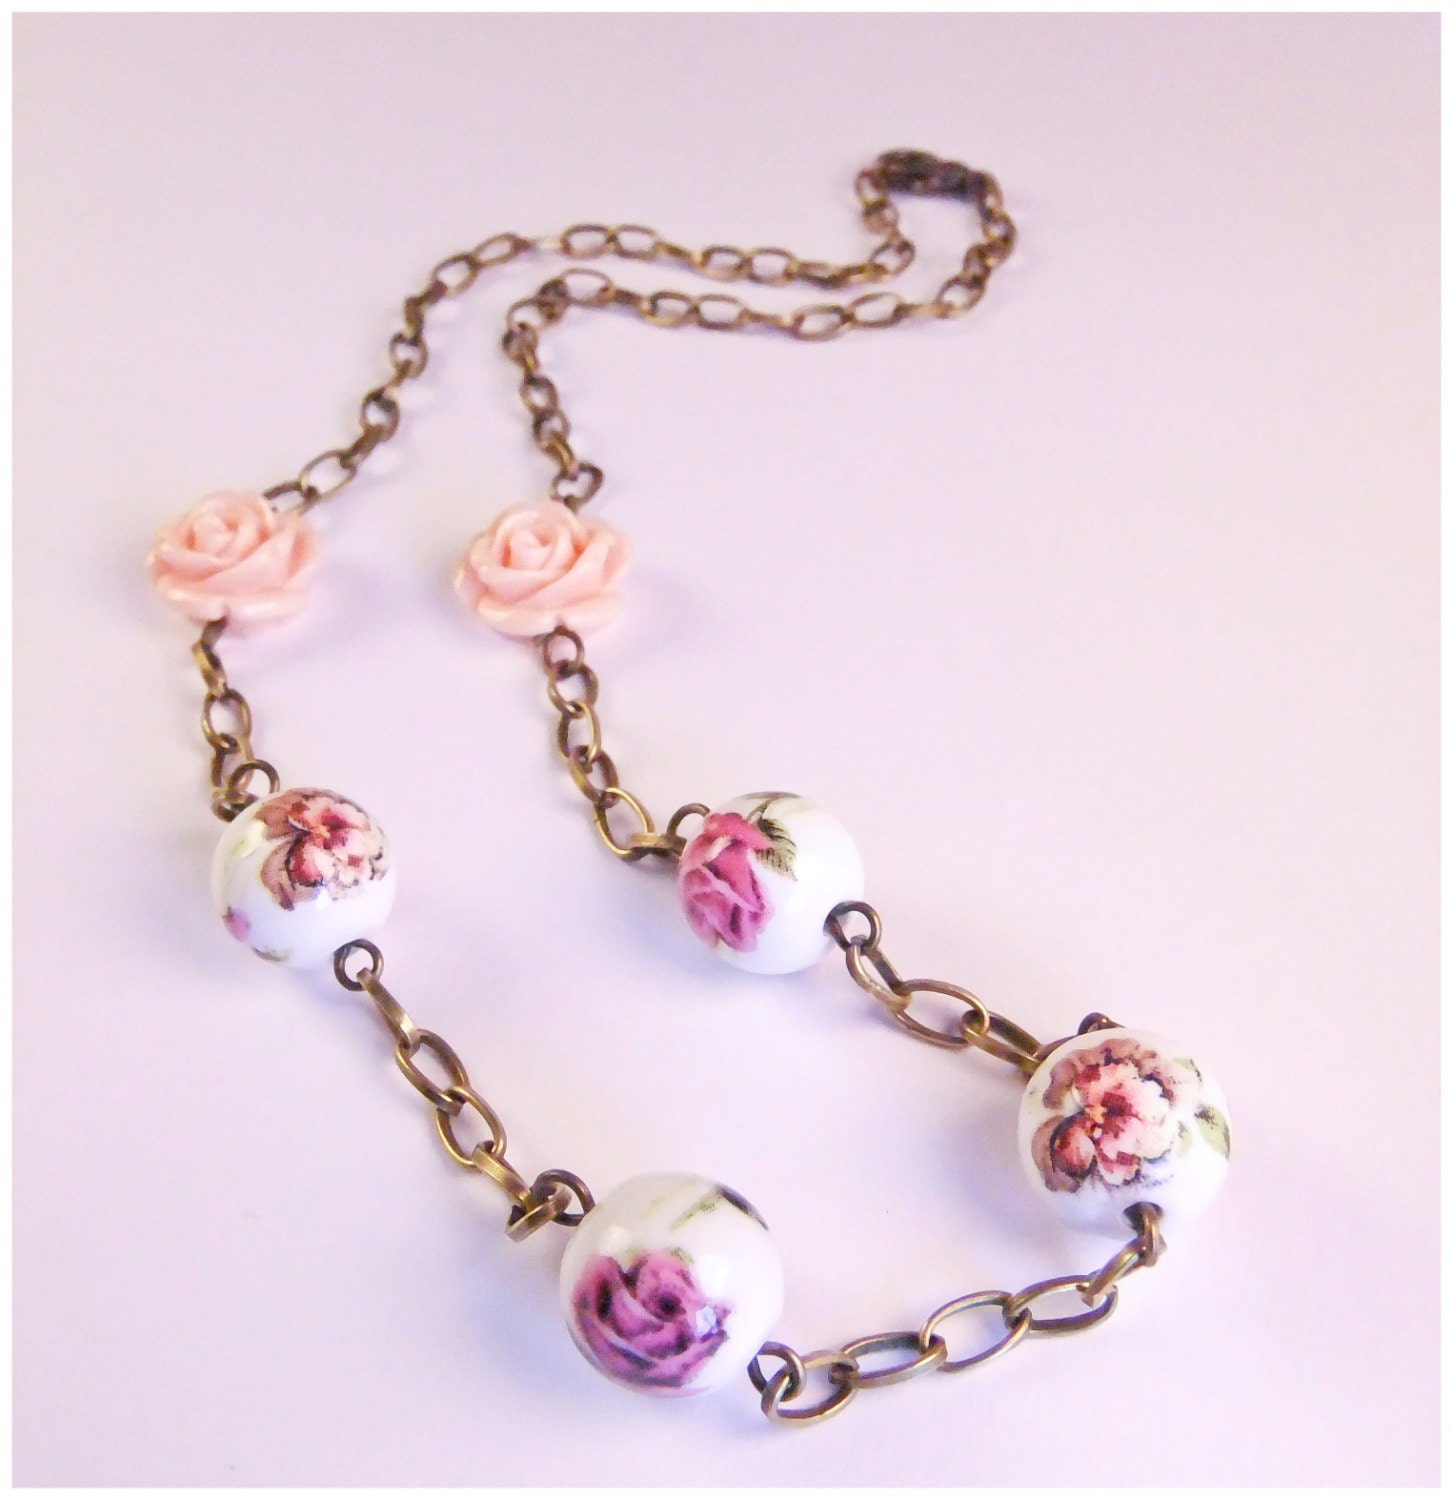 vintage rose necklace, antique copper chain with rose and flower beads.